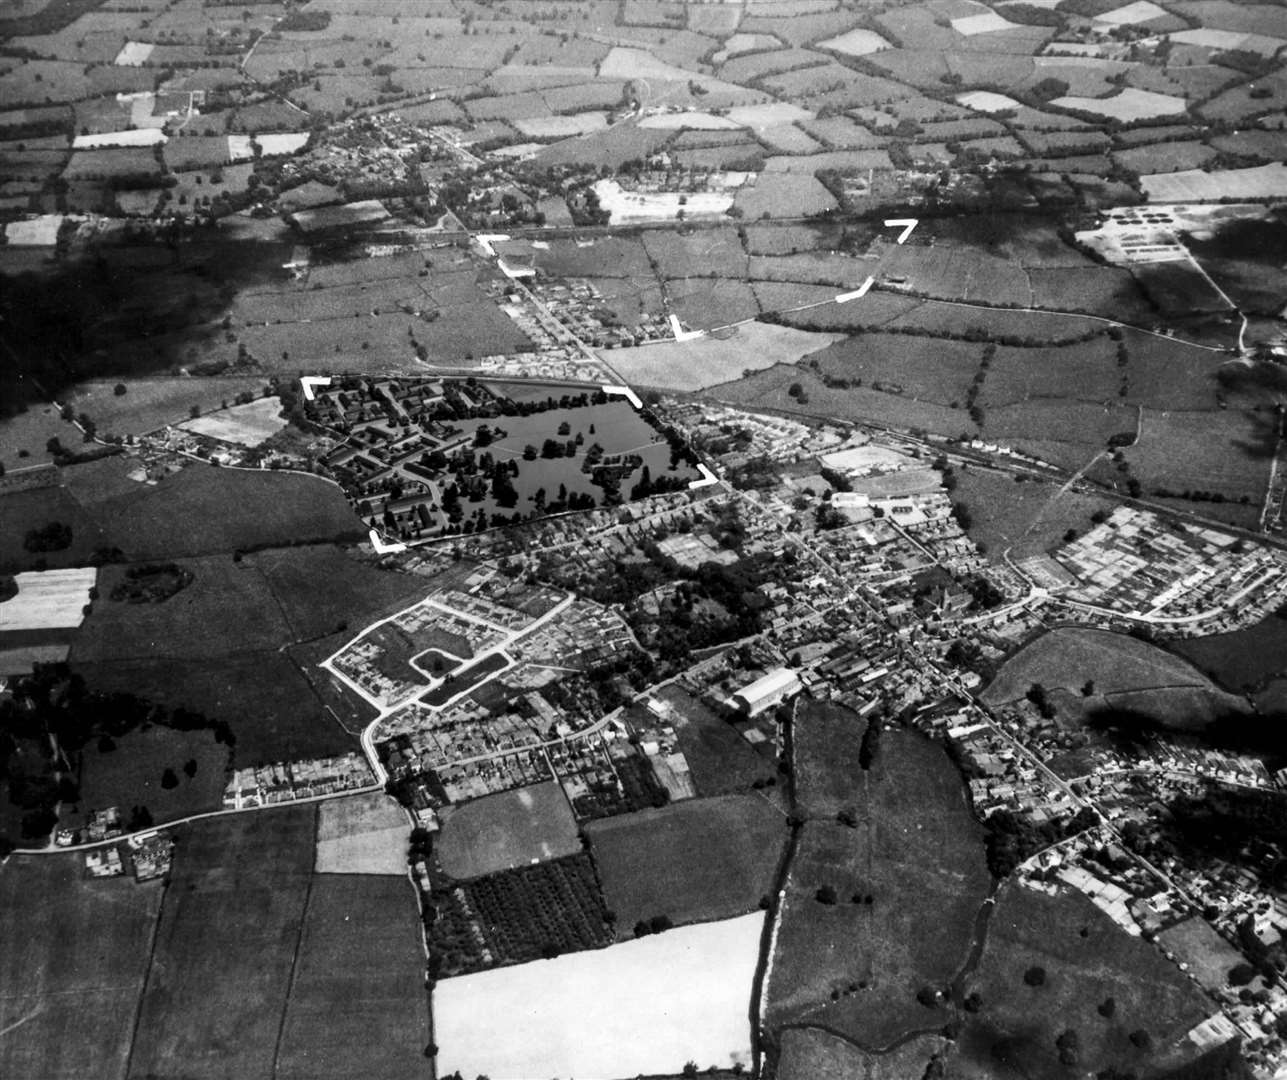 And 14 years earlier, Edenbridge from the sky in July 1953